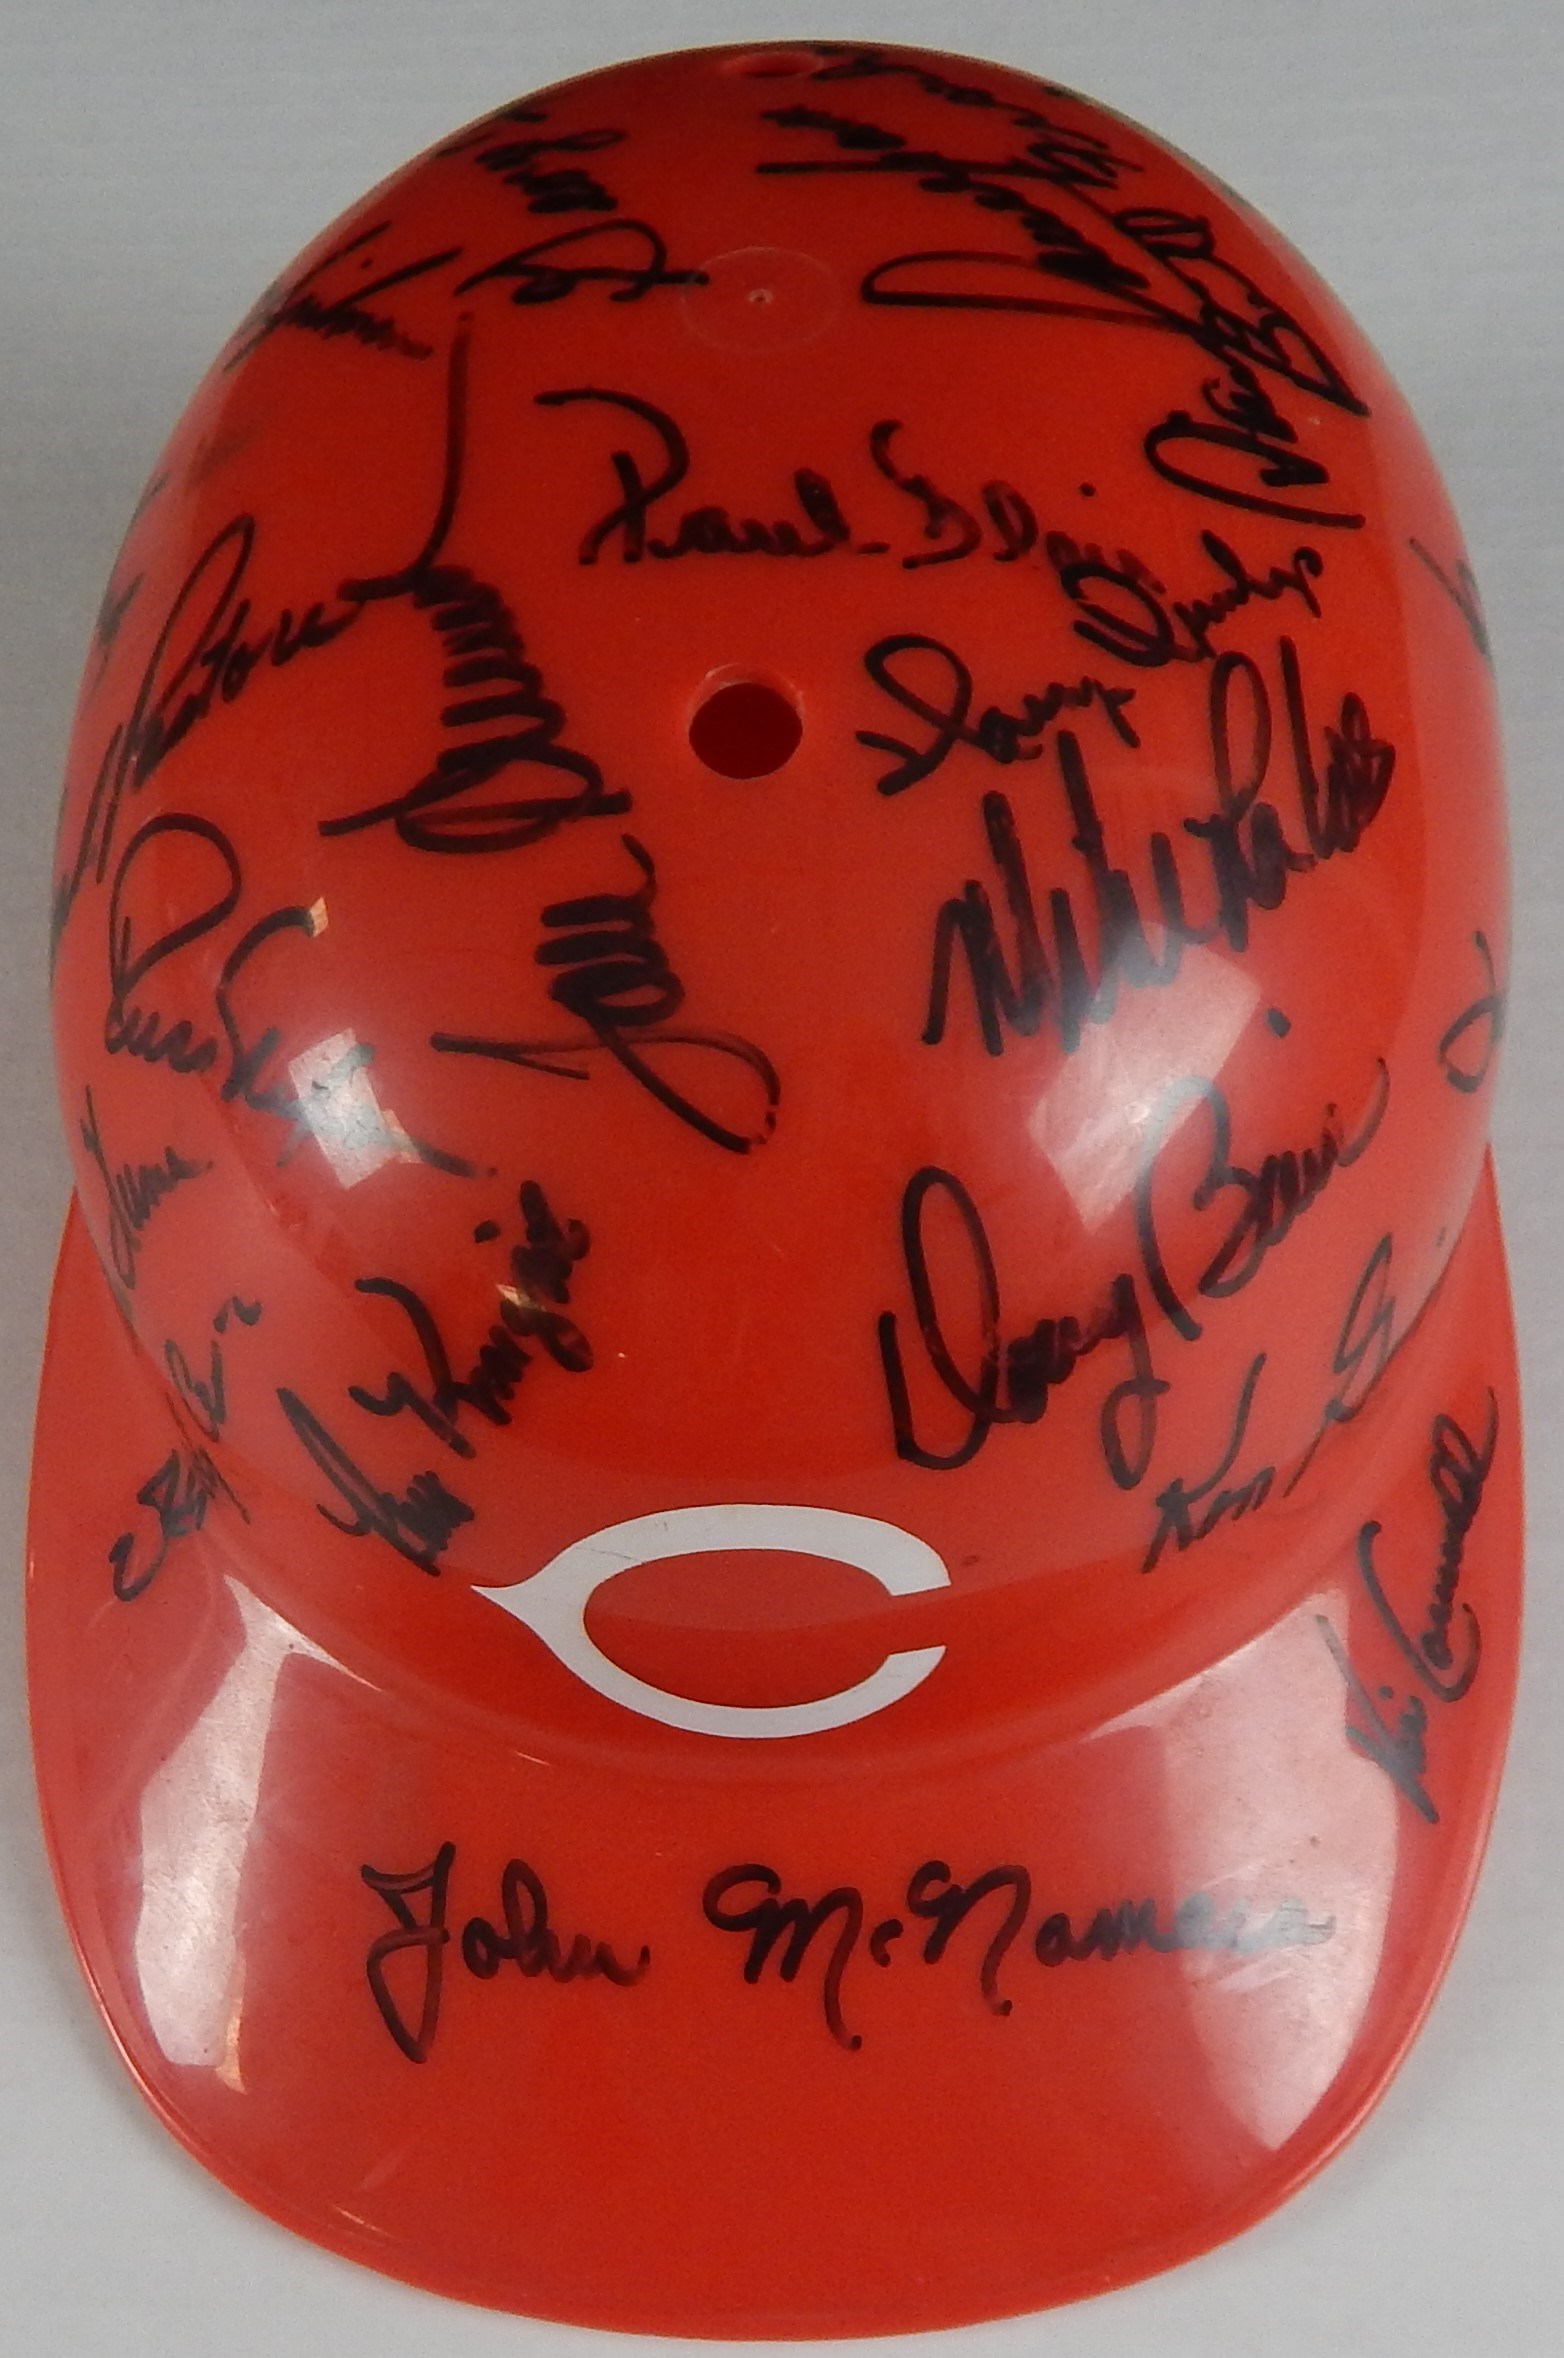 Baseball Autographs - 1979 Reds Team Signed Novelty Batting Helmet From the Bernie Stowe Collection